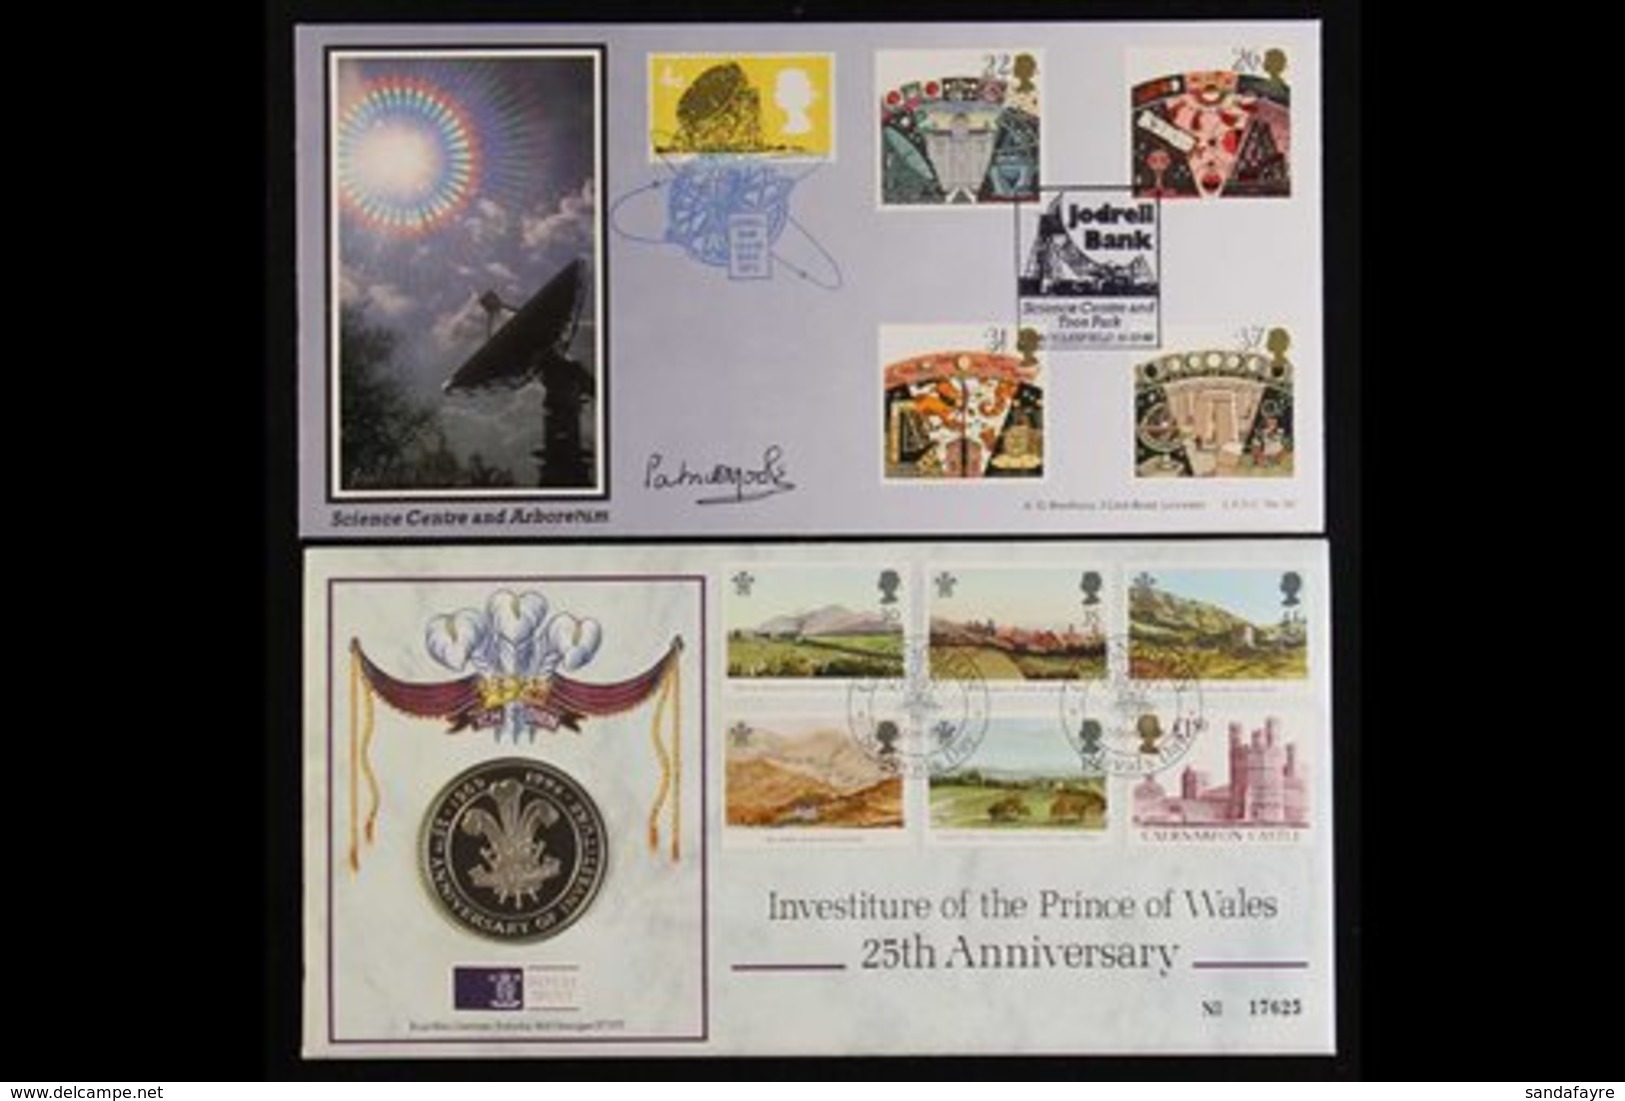 1971-2000's INTERESTING COVERS/CARDS CARTON. A Substantial Hoard In A Large Box, We See 4 Albums Of First Day Covers Fro - FDC